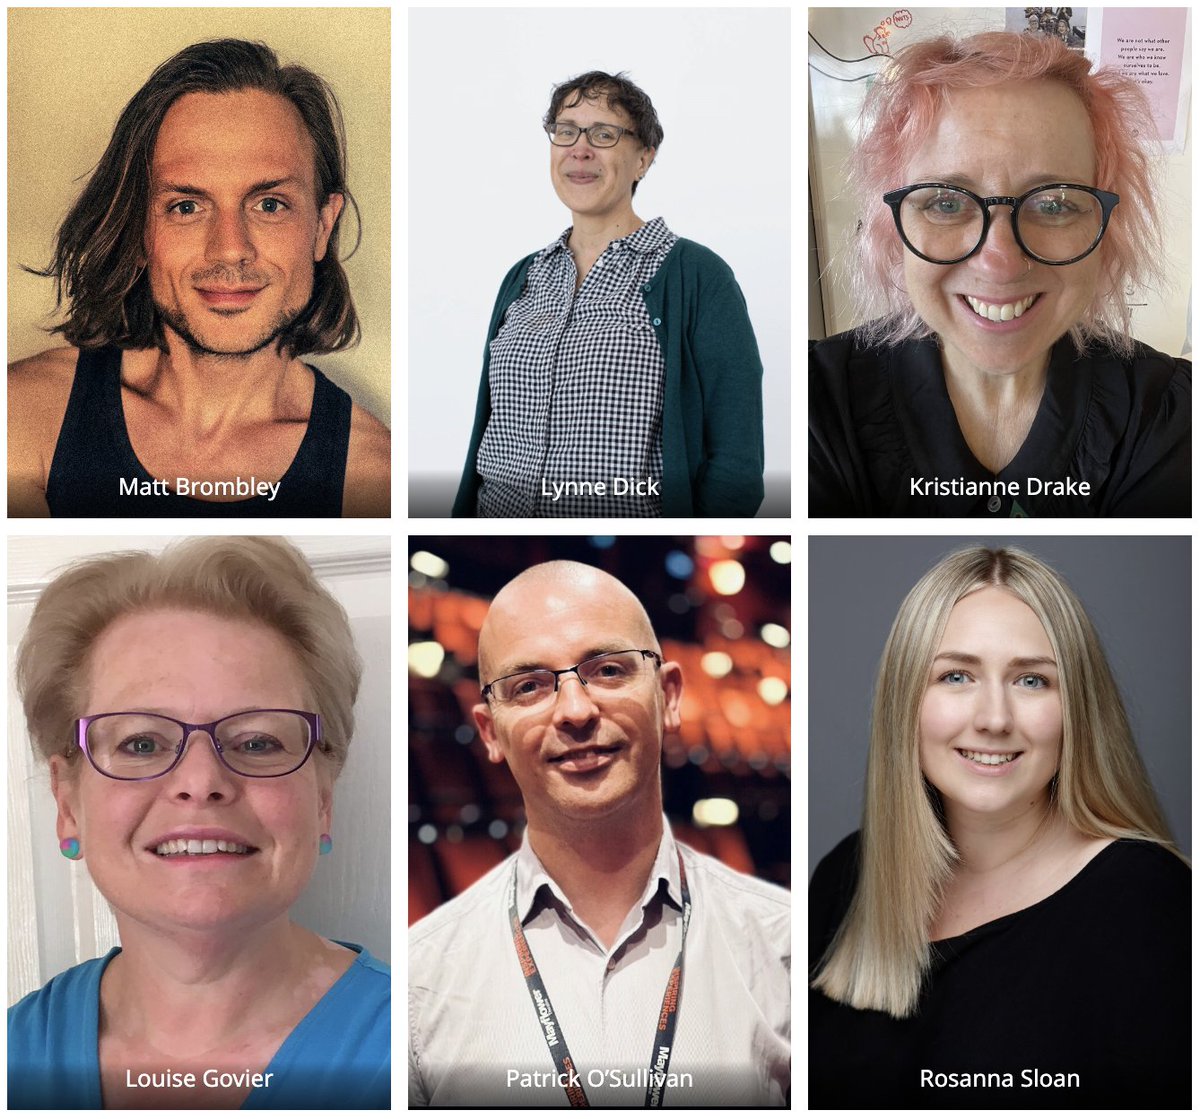 As we prepare for a new academic year, it's time to introduce our new Steering Group members! With their support, we're excited about the future of creative education in our city. #SouthamptonUK #CulturalEducation loom.ly/qoVdsoU